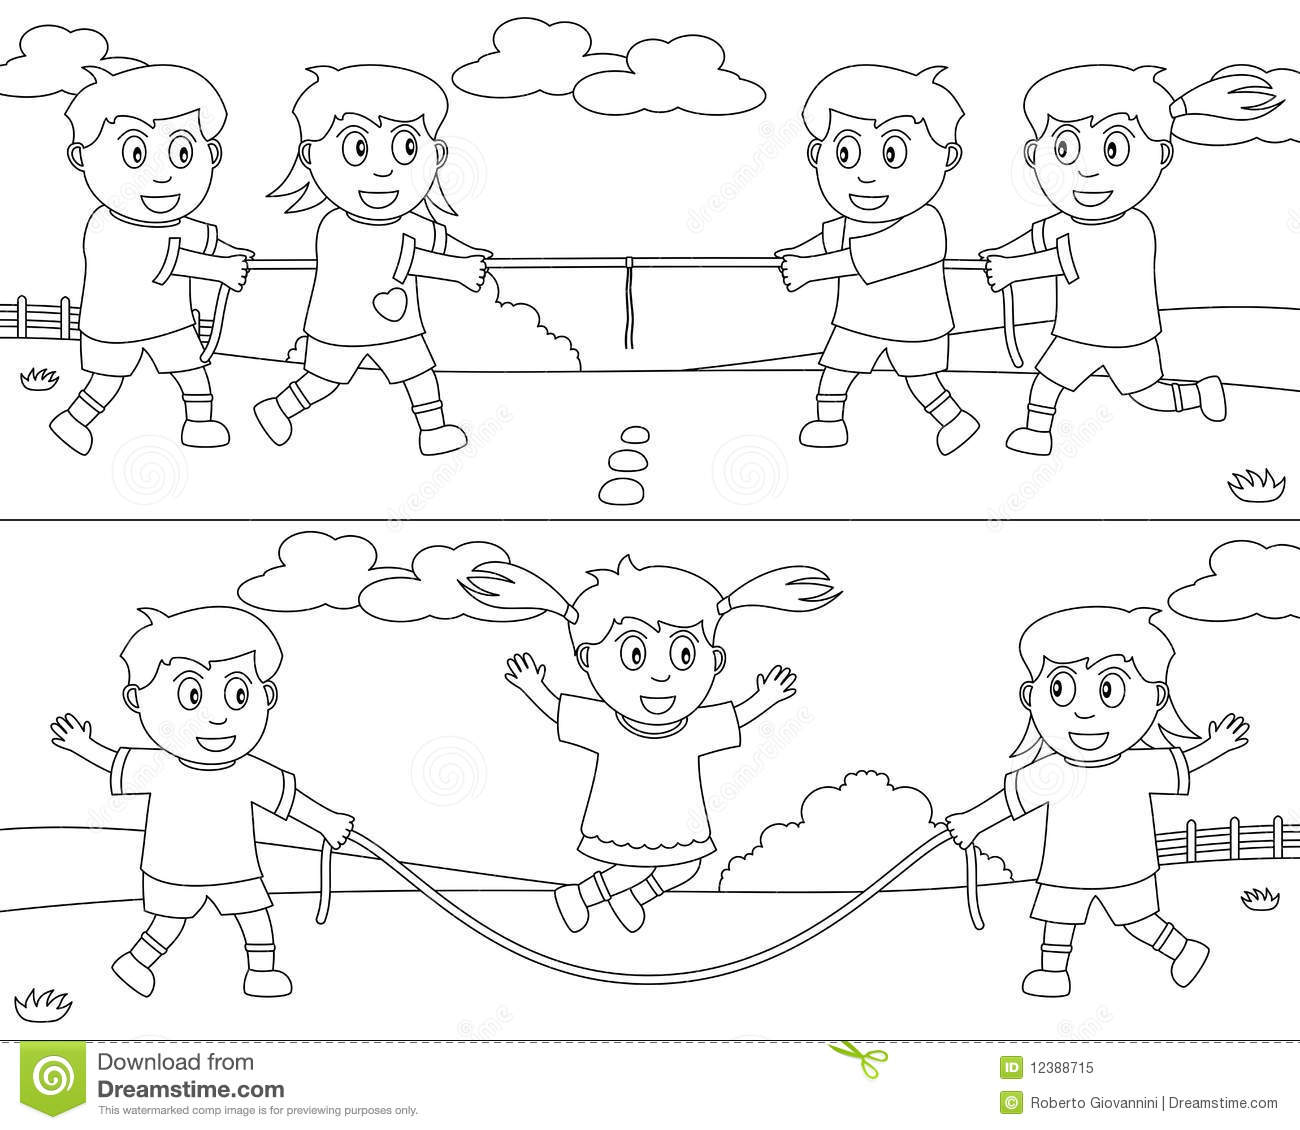 Rope Image For Kids